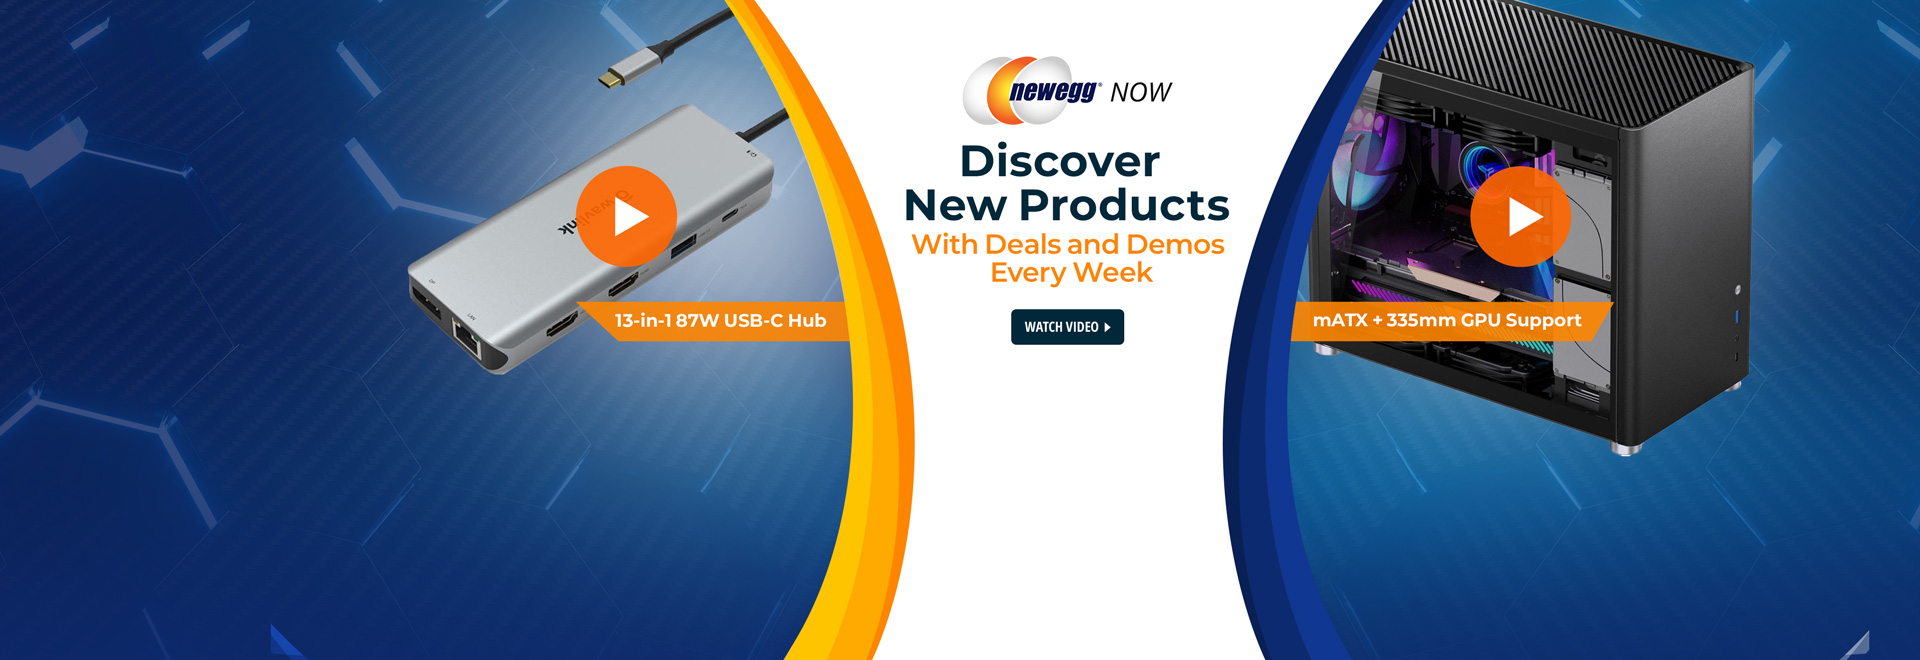 Discover New Products